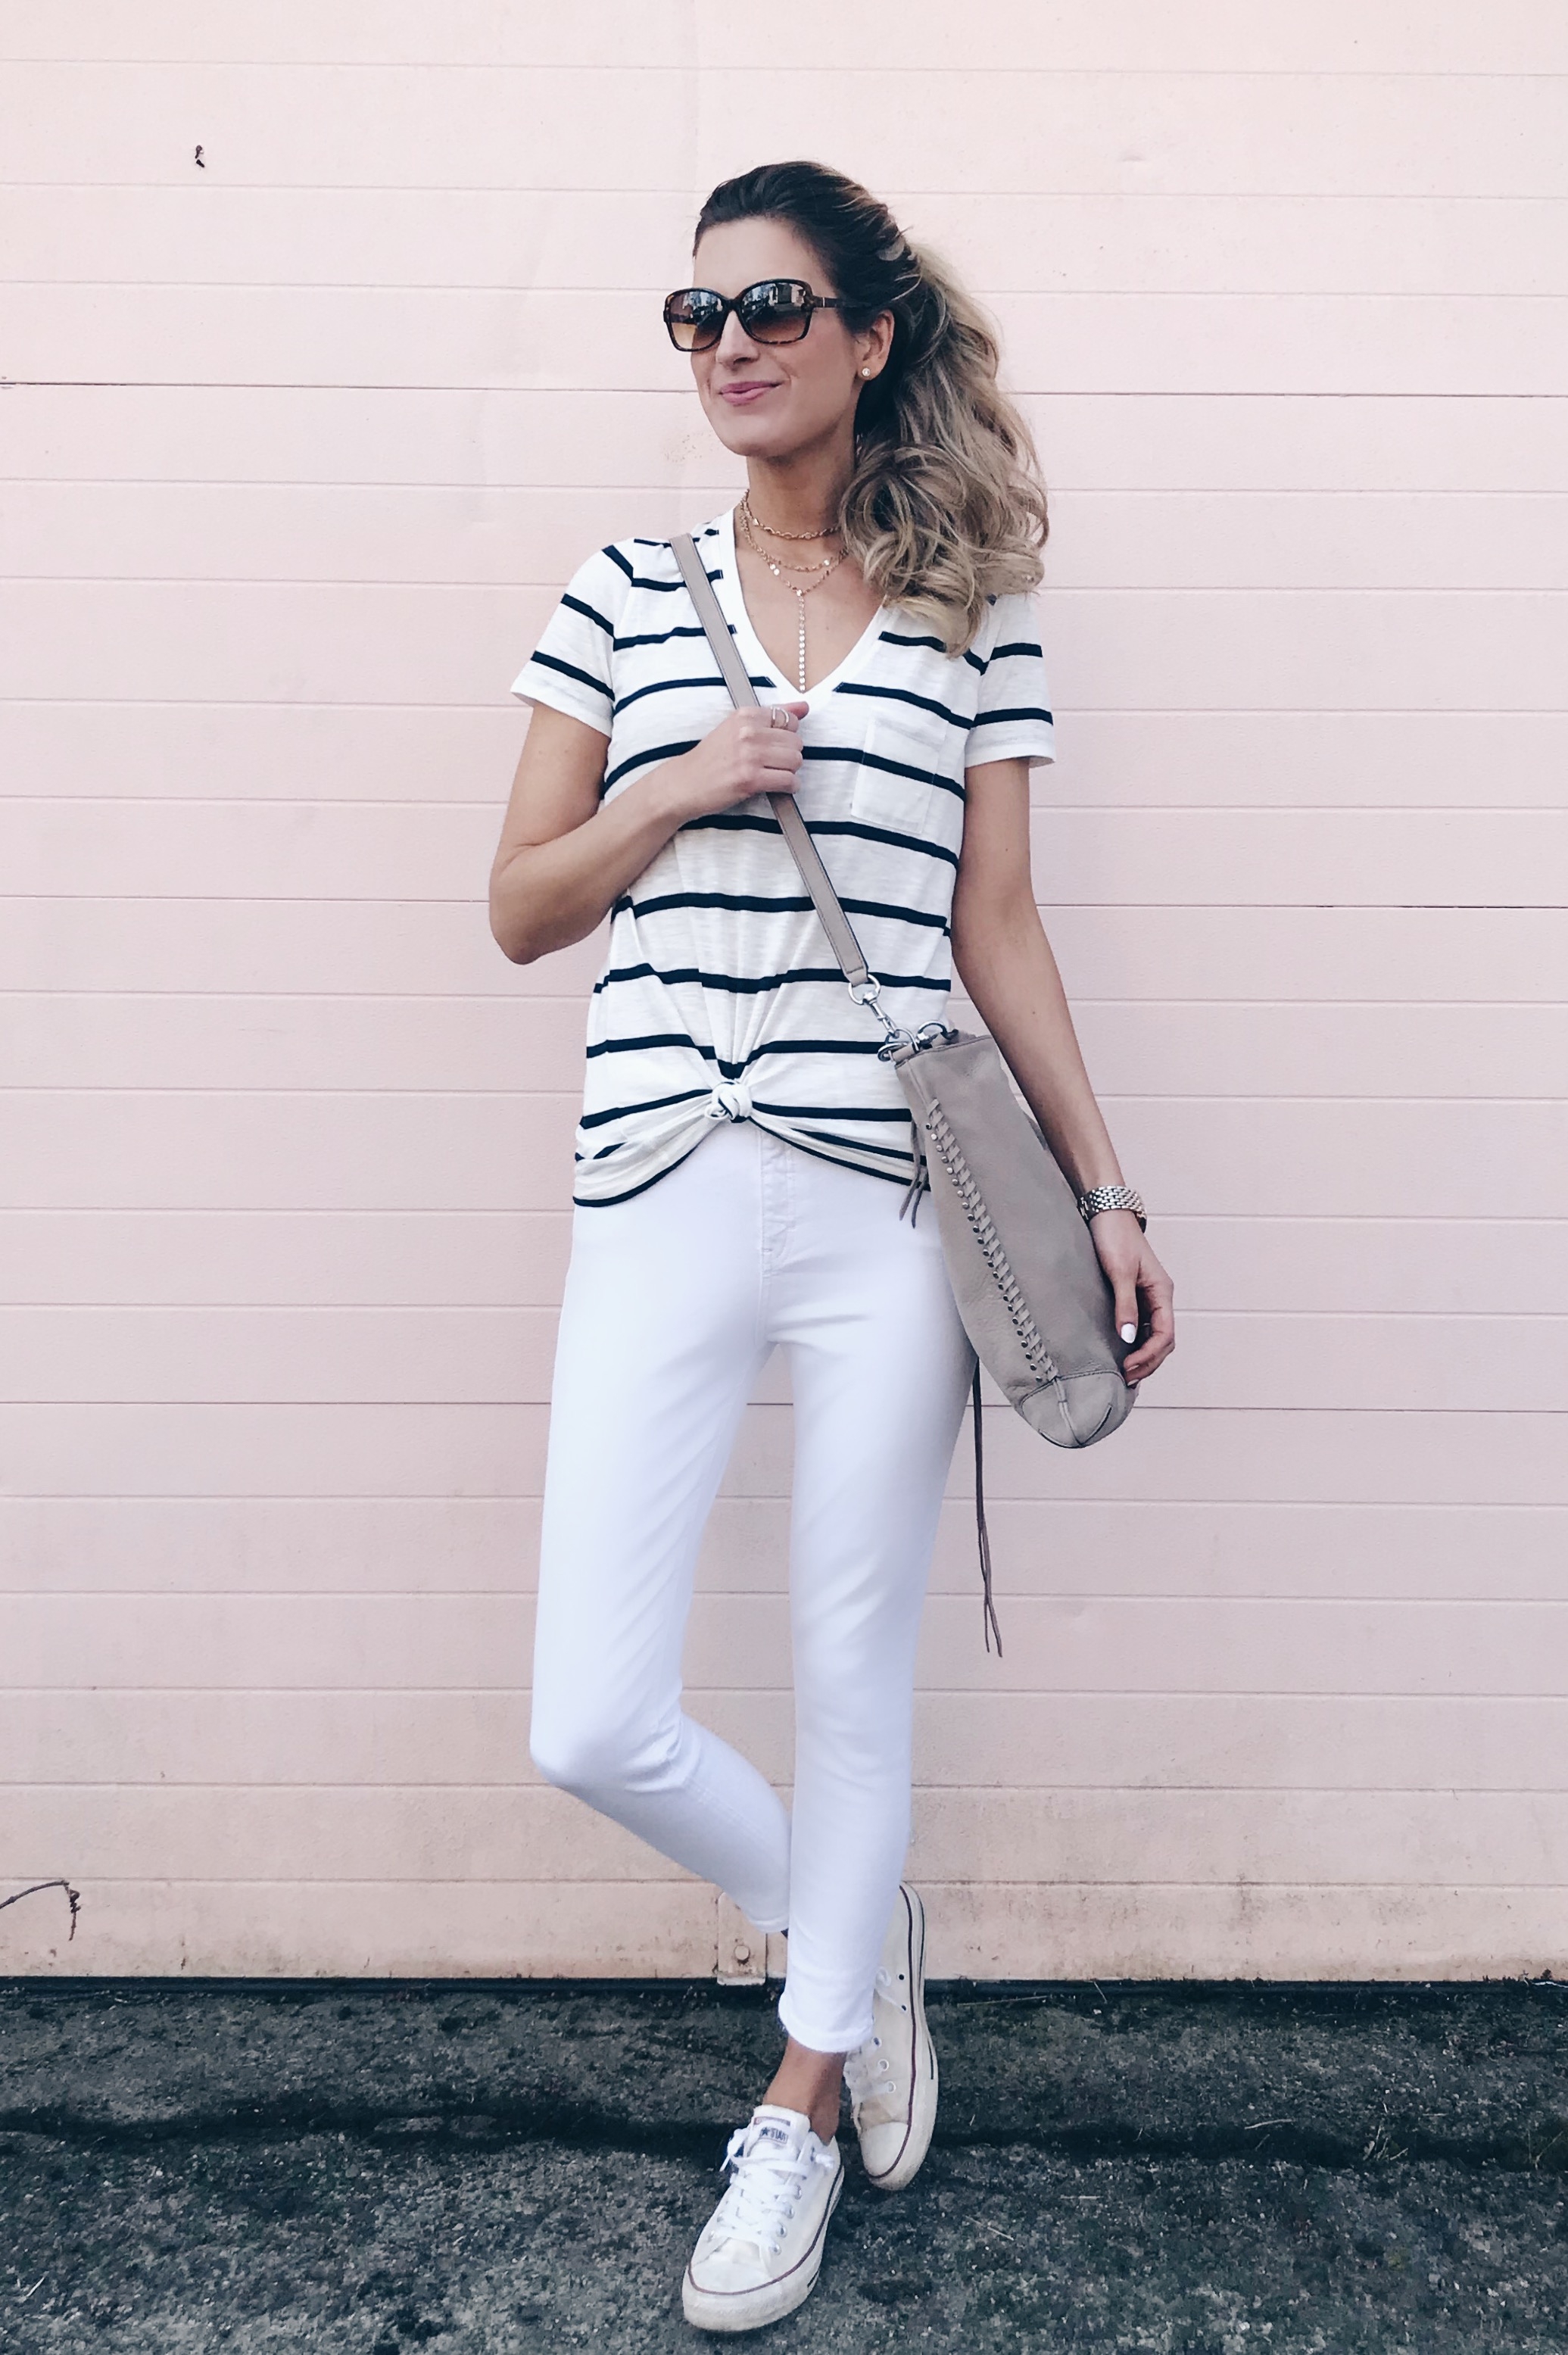 spring capsule wardrobe 2018 - white skinny jeans outfit with knotted striped tee and sneakers on pinteresting plans connecticut fashion blog